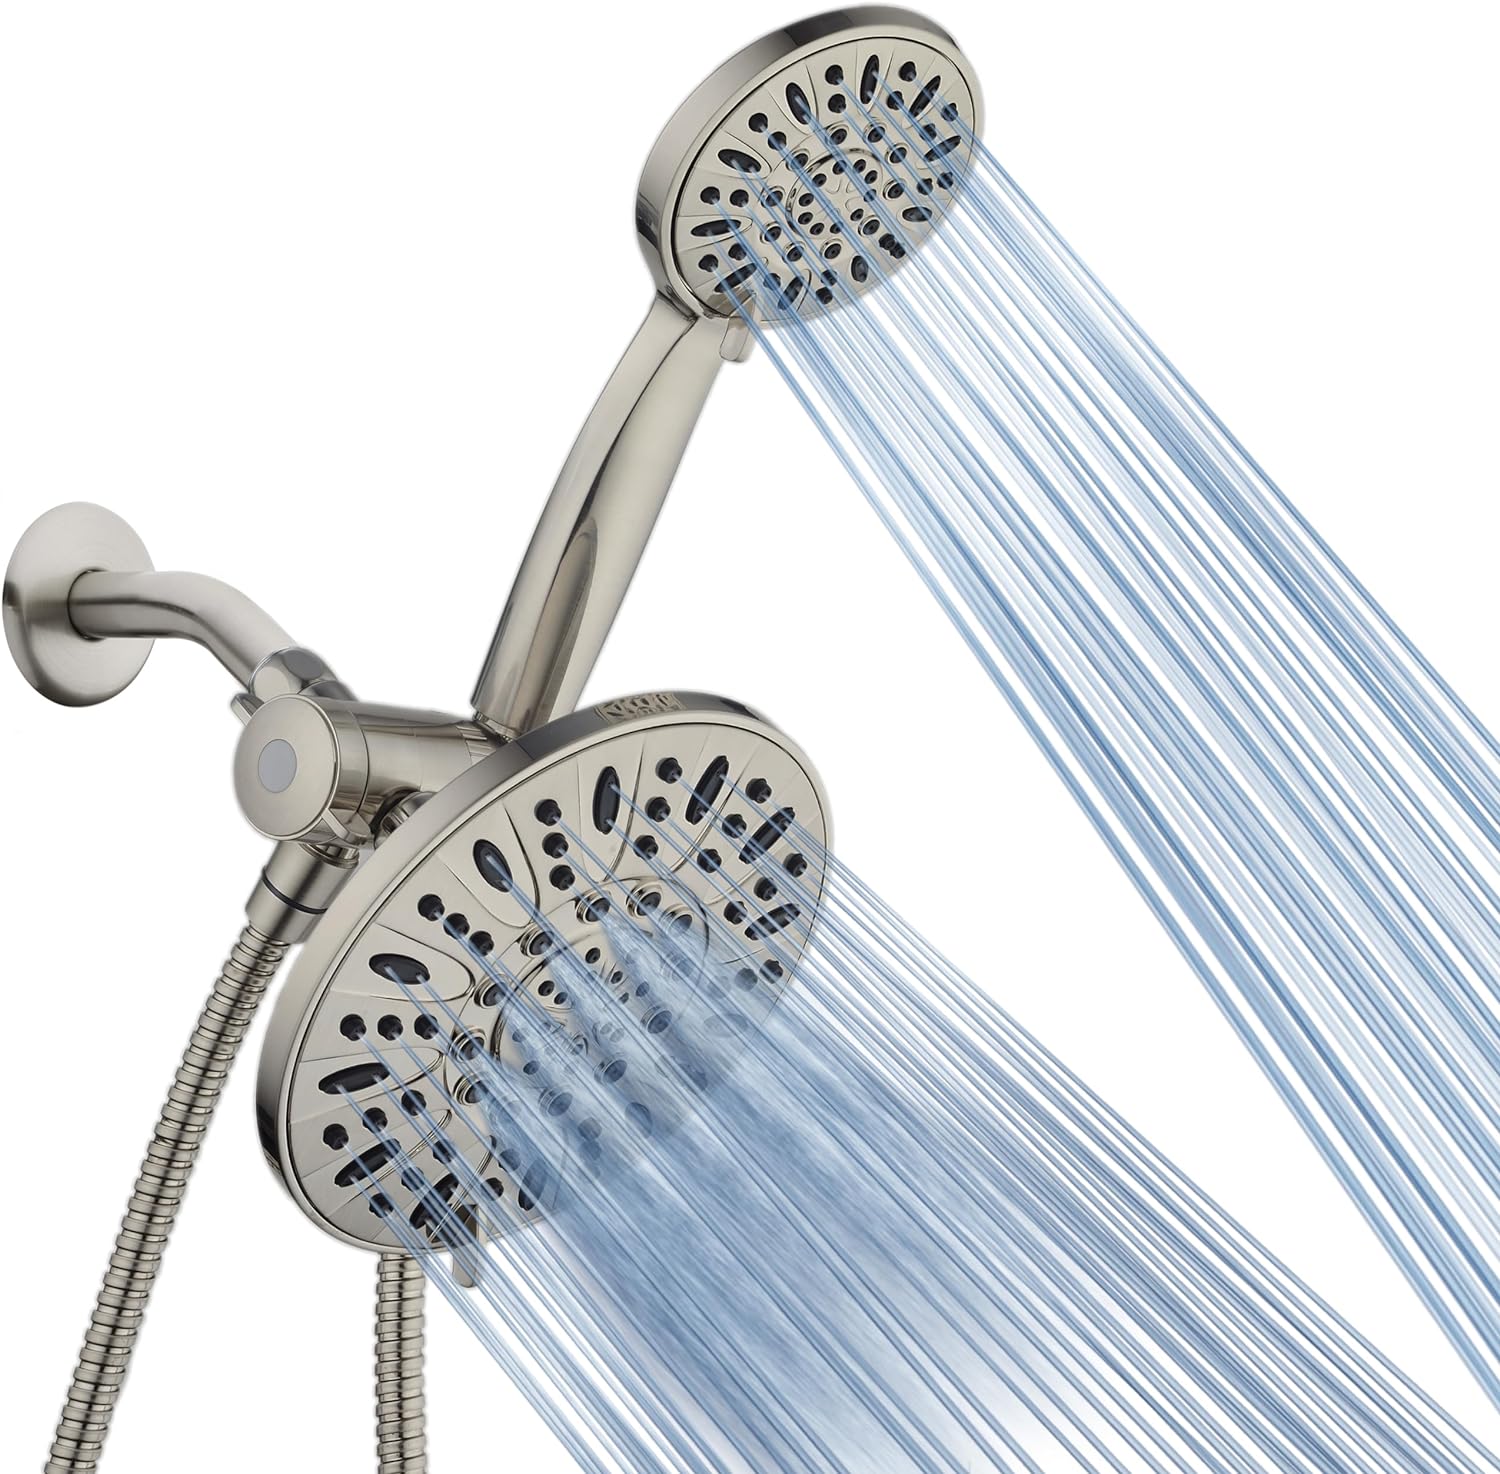 AquaDance 7 Premium High Pressure 3-Way Rainfall Combo with Stainless Steel Hose  Enjoy Luxurious 6-setting Rain Shower Head and Hand Held Shower Separately or Together  Brushed Nickel Finish